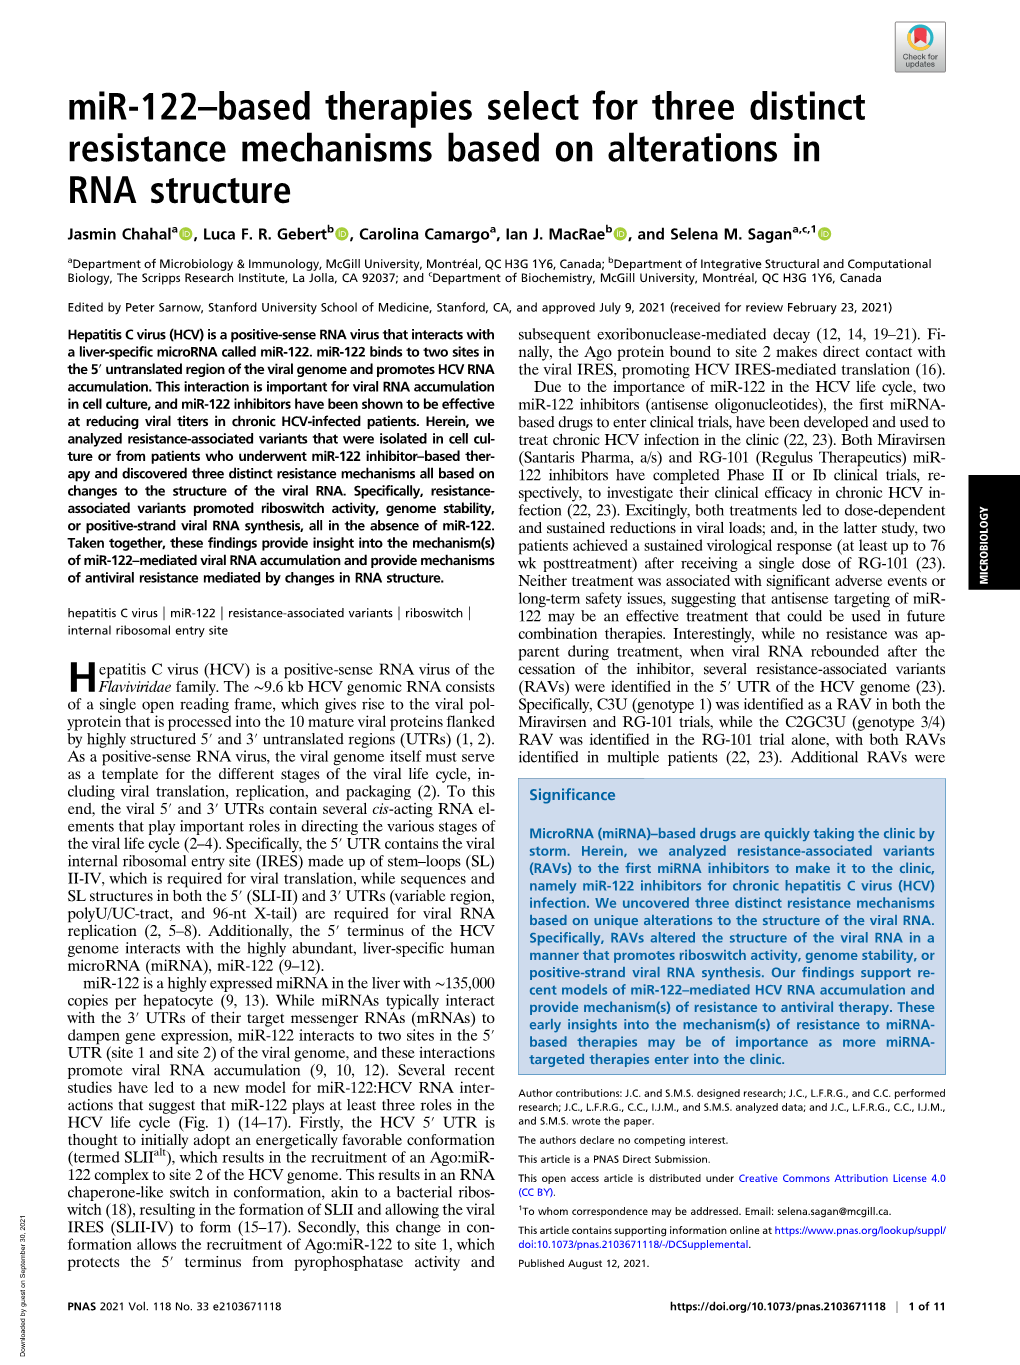 Mir-122–Based Therapies Select for Three Distinct Resistance Mechanisms Based on Alterations in RNA Structure